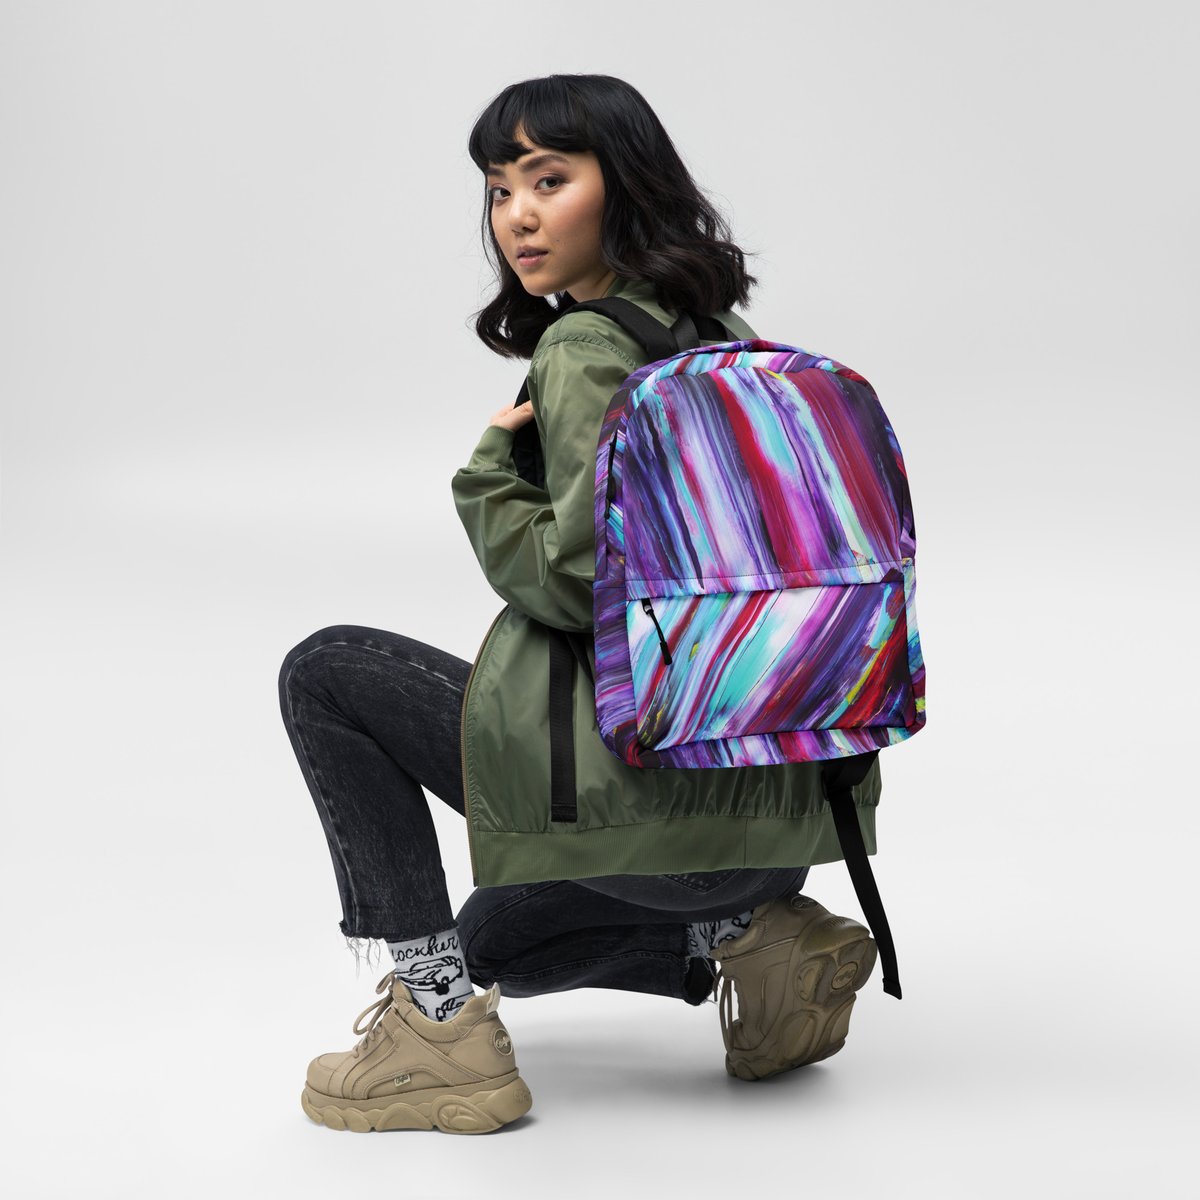 Image of "Purpology" Backpack